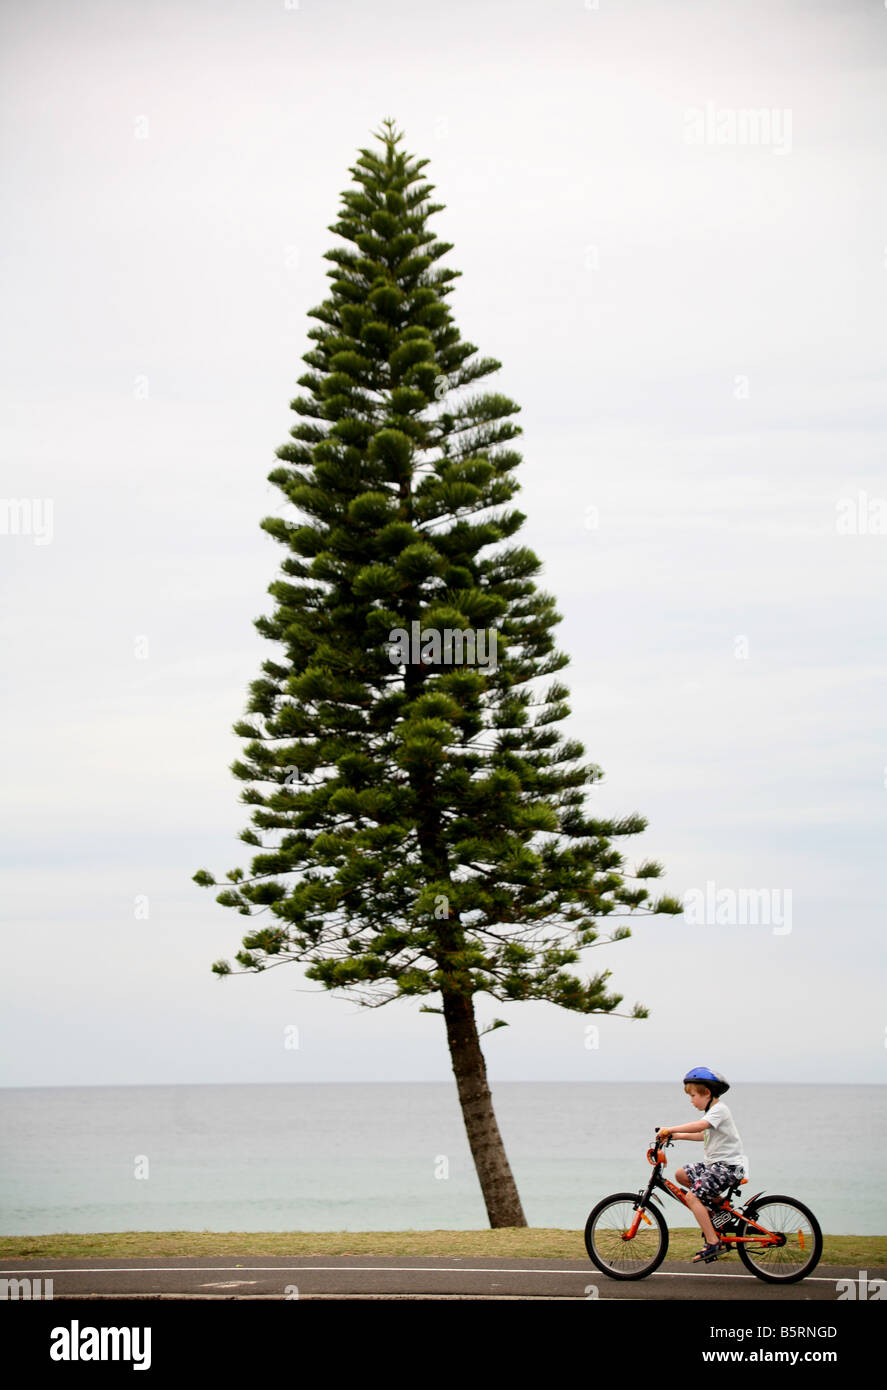 A child rides a bicycle past one of the Norfolk pines that line Manly beach in Sydney Australia Stock Photo